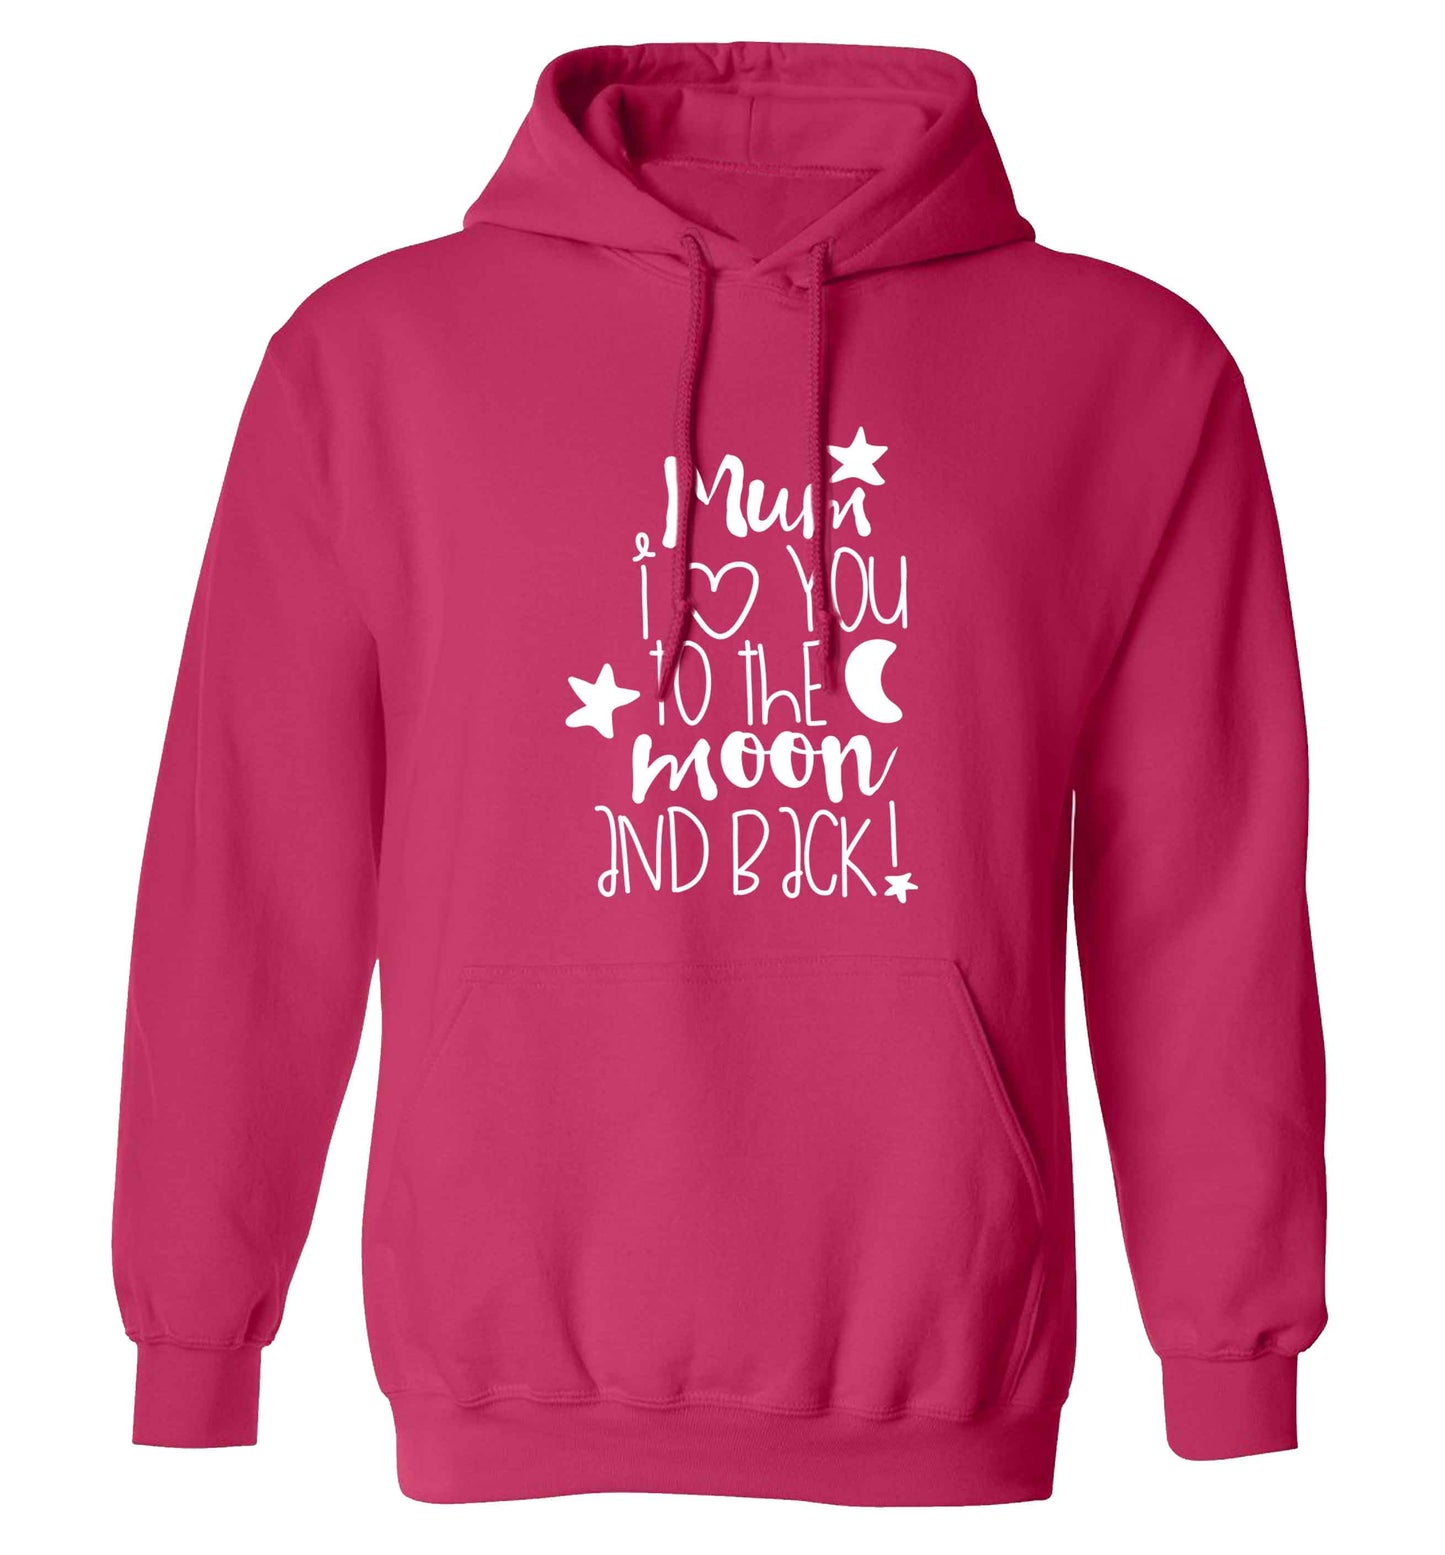 Mum I love you to the moon and back adults unisex pink hoodie 2XL